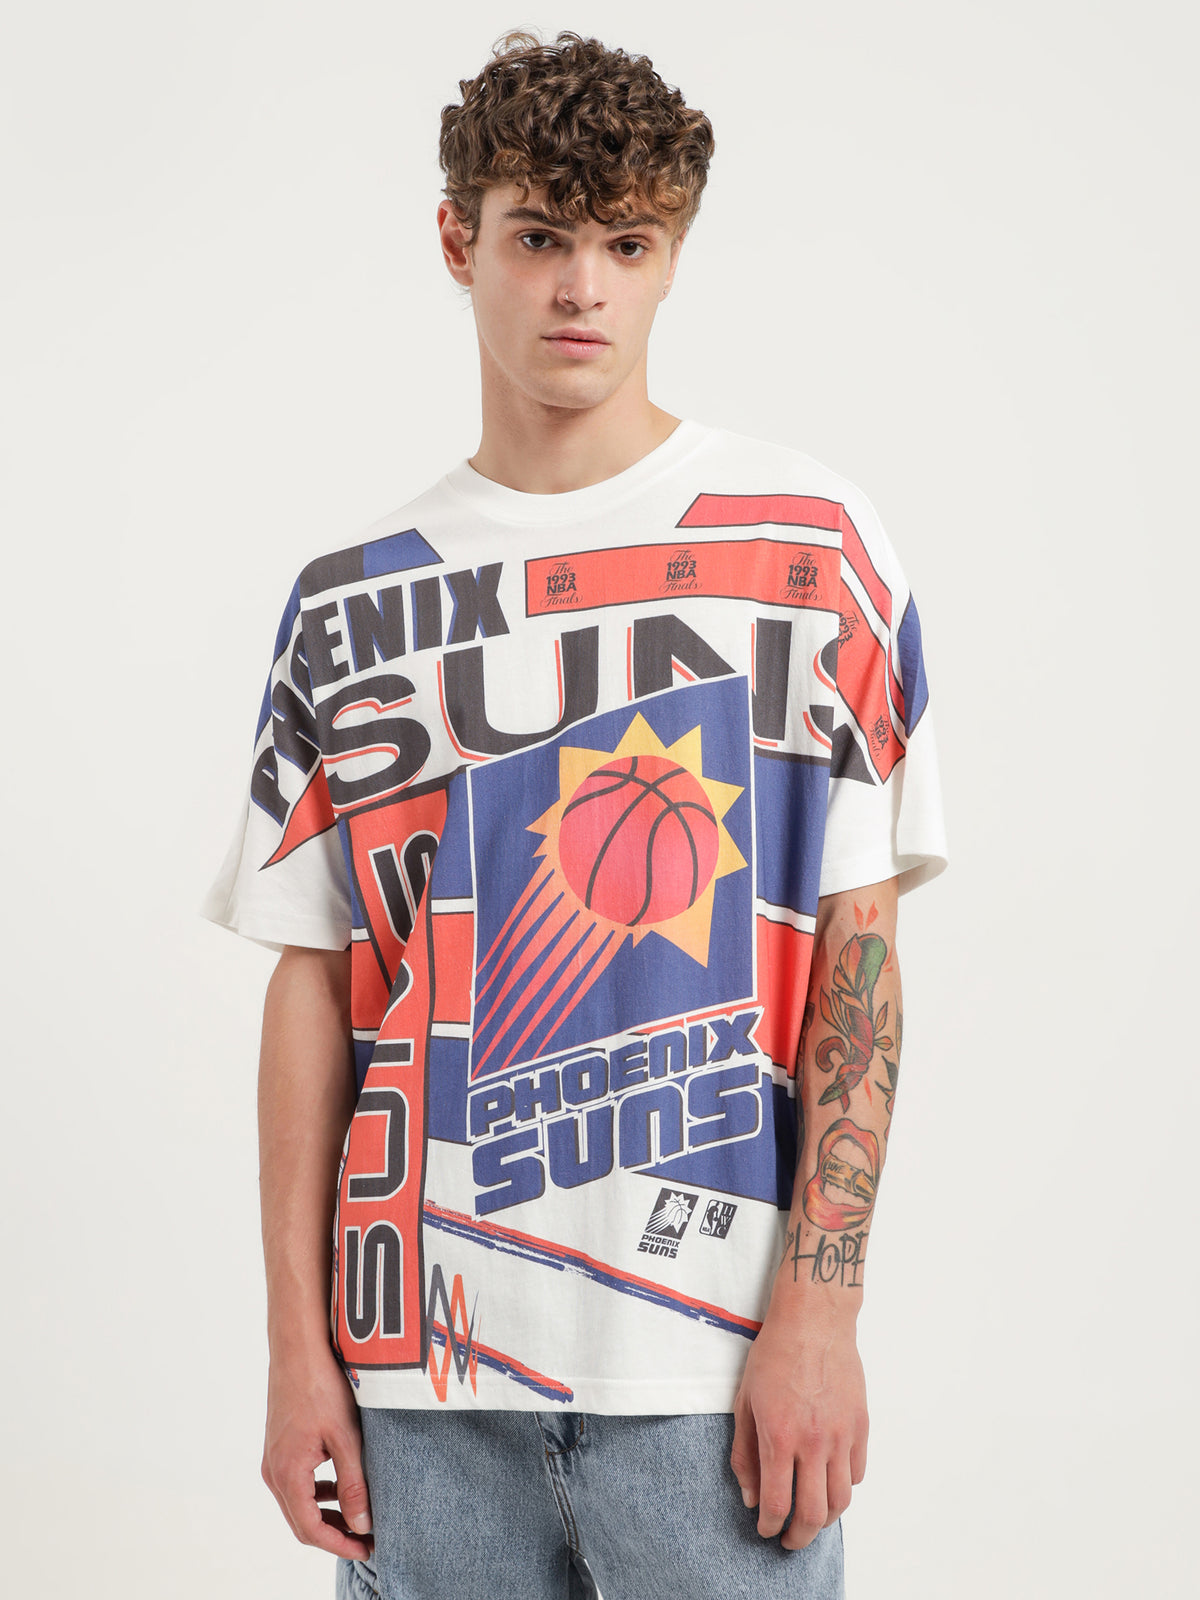 Suns 1993 Game T-Shirt in White